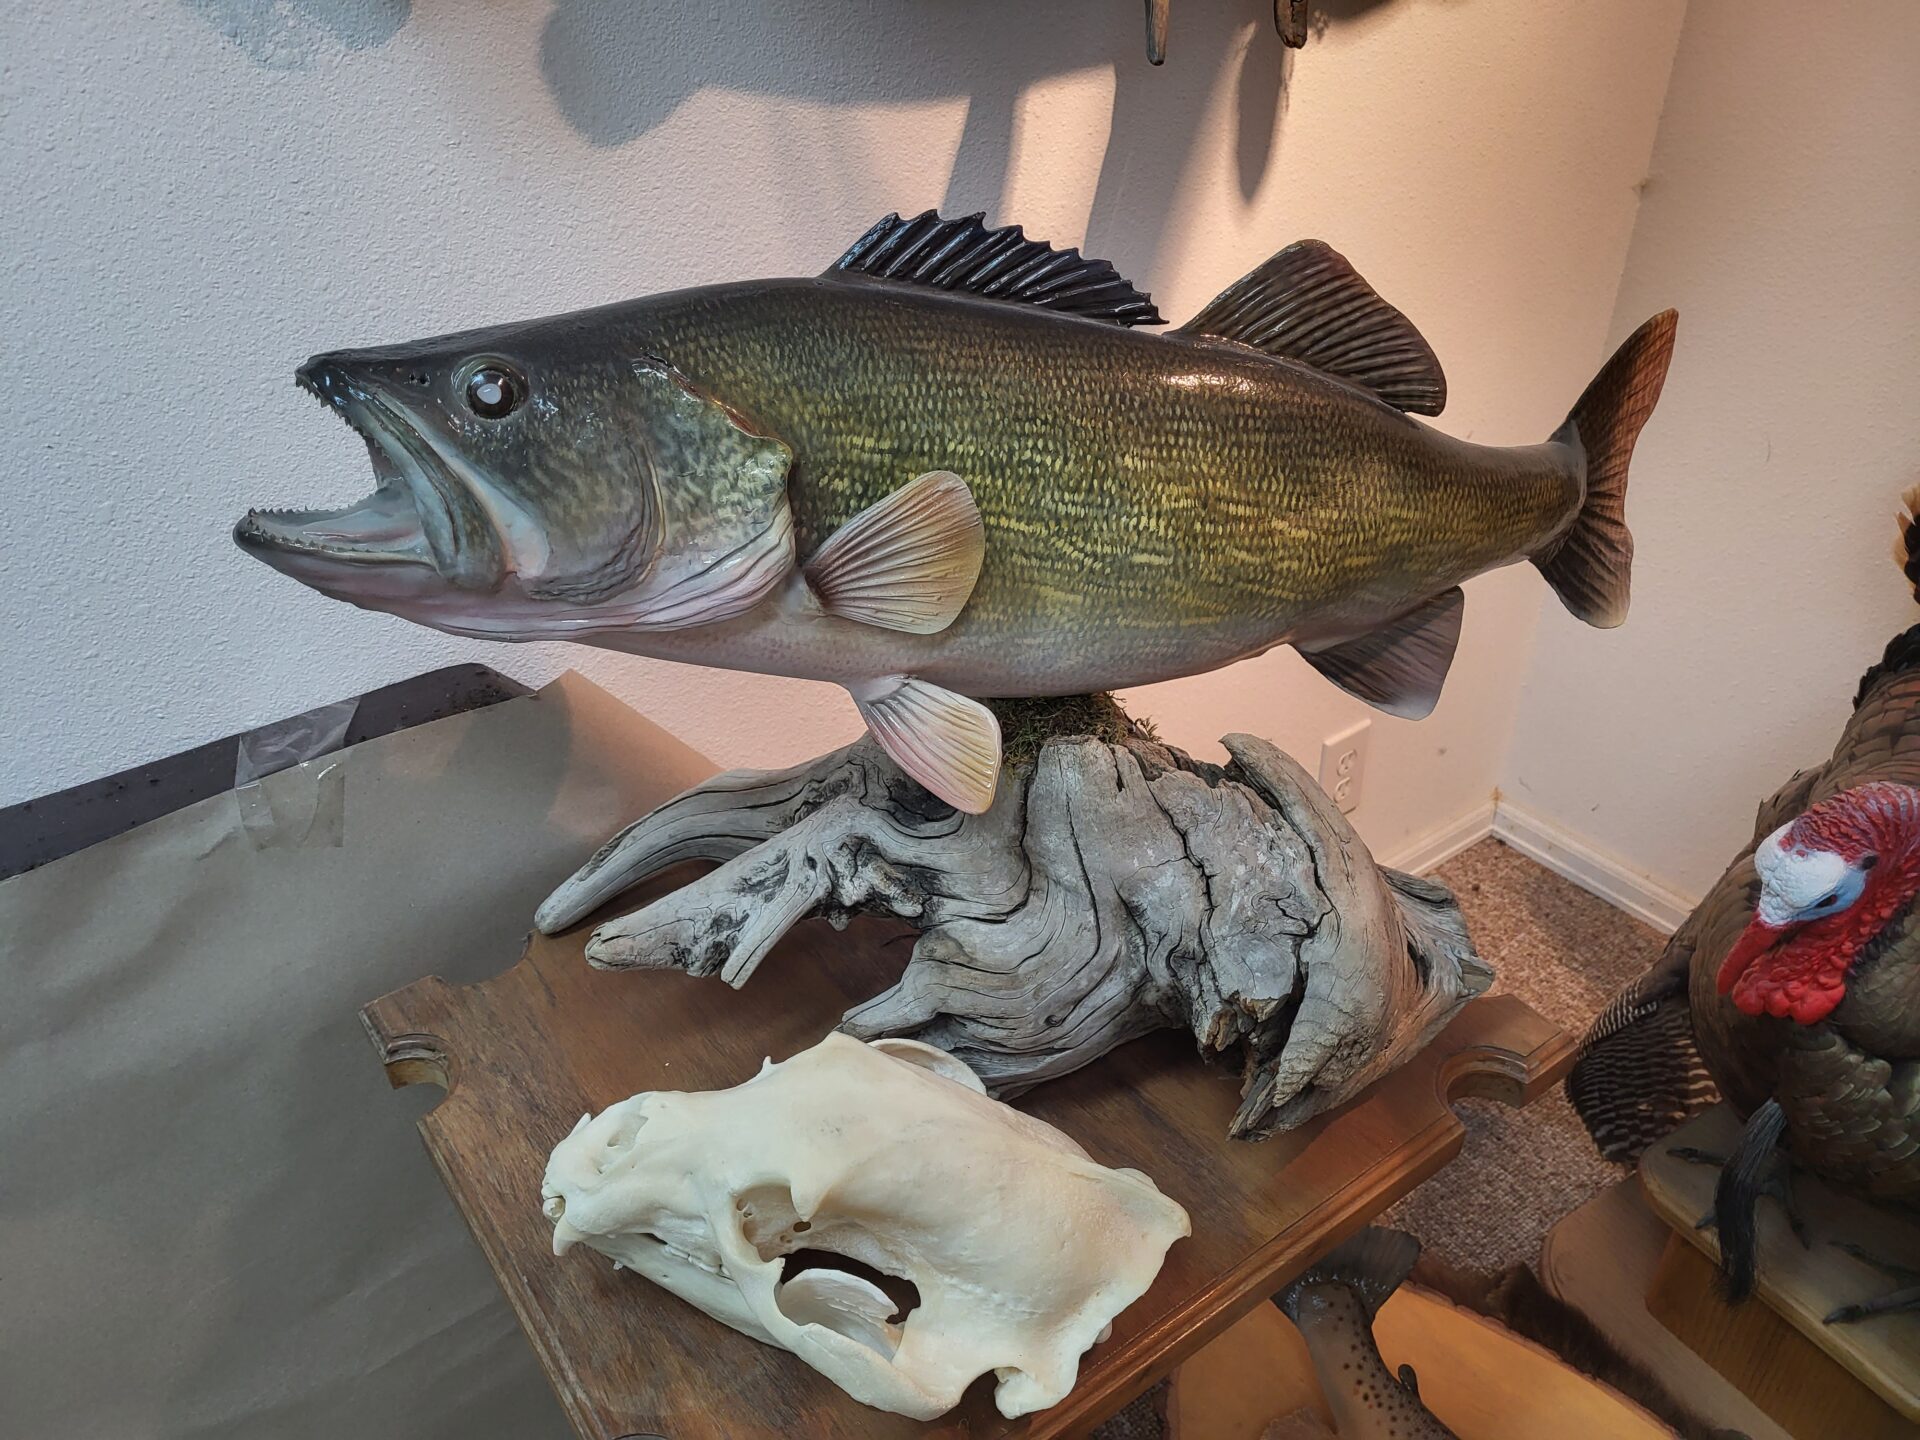 A beautiful fish taxidermy for display at the gallery